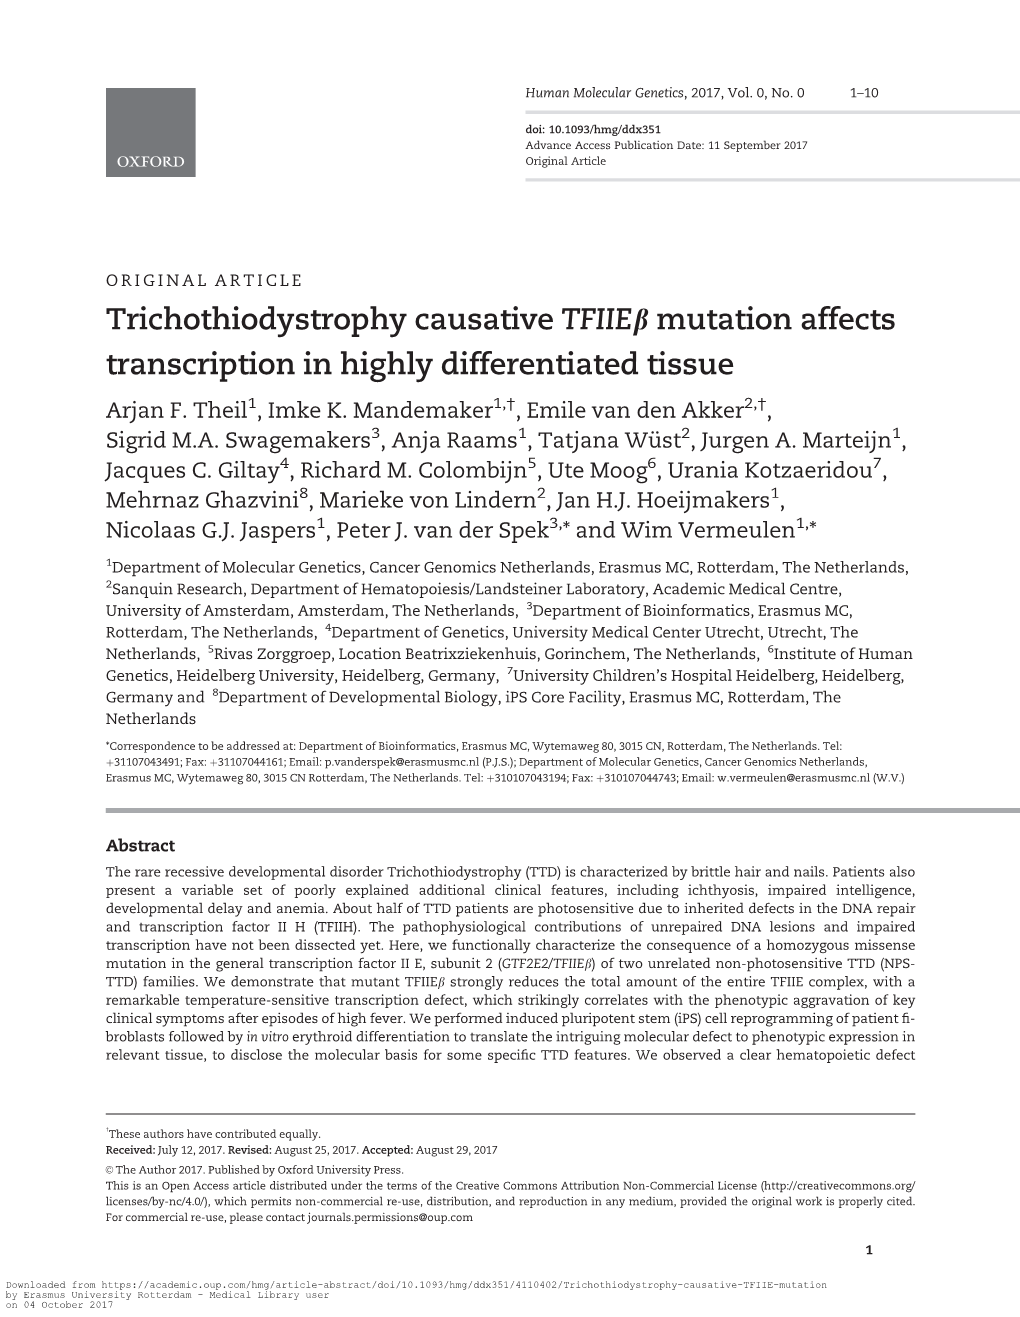 Trichothiodystrophy Causative Tfiieb Mutation Affects Transcription in Highly Differentiated Tissue Arjan F